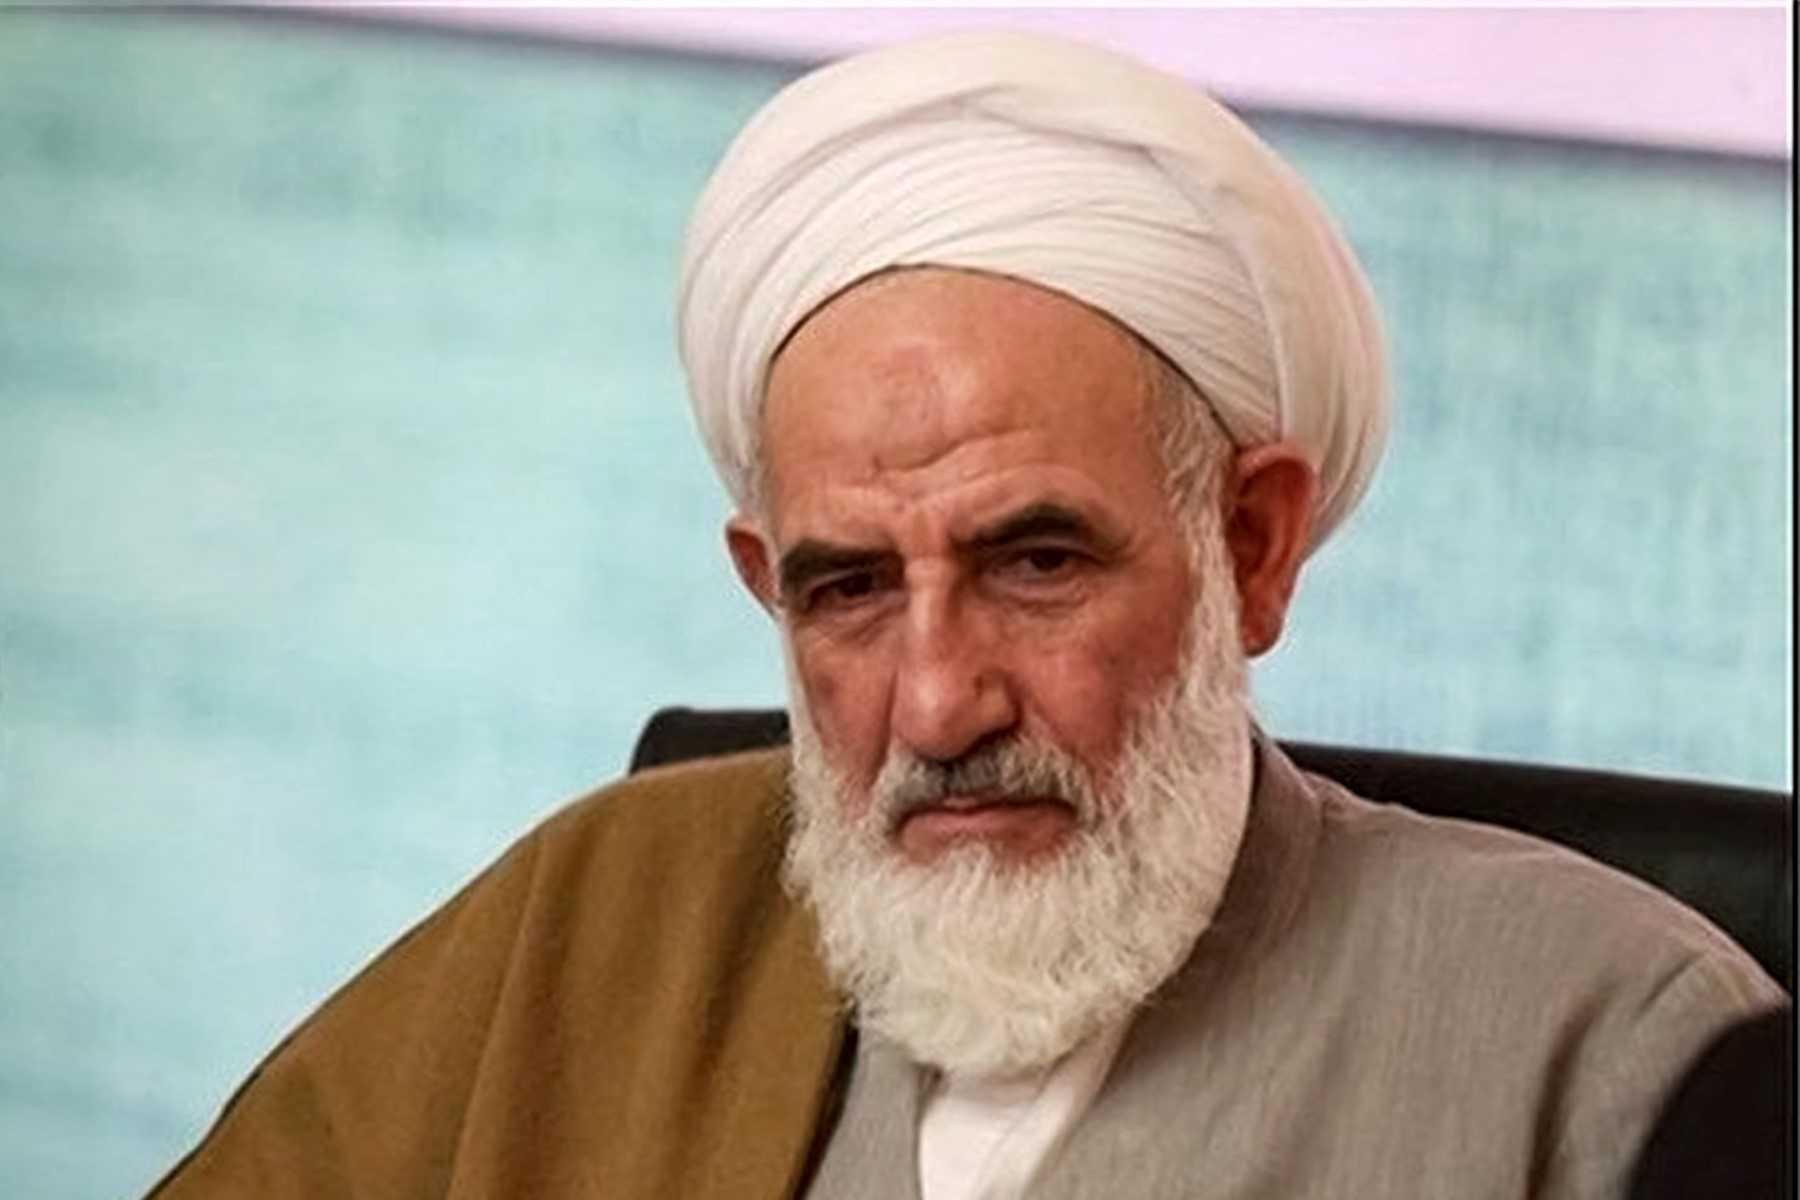 This undated handout picture released on April 26 by the Tasnim news agency shows Iranian Shiite cleric Ayatollah Abbas Ali, a member of the Assembly of Experts that selects the country's supreme leader. Photo: AFP